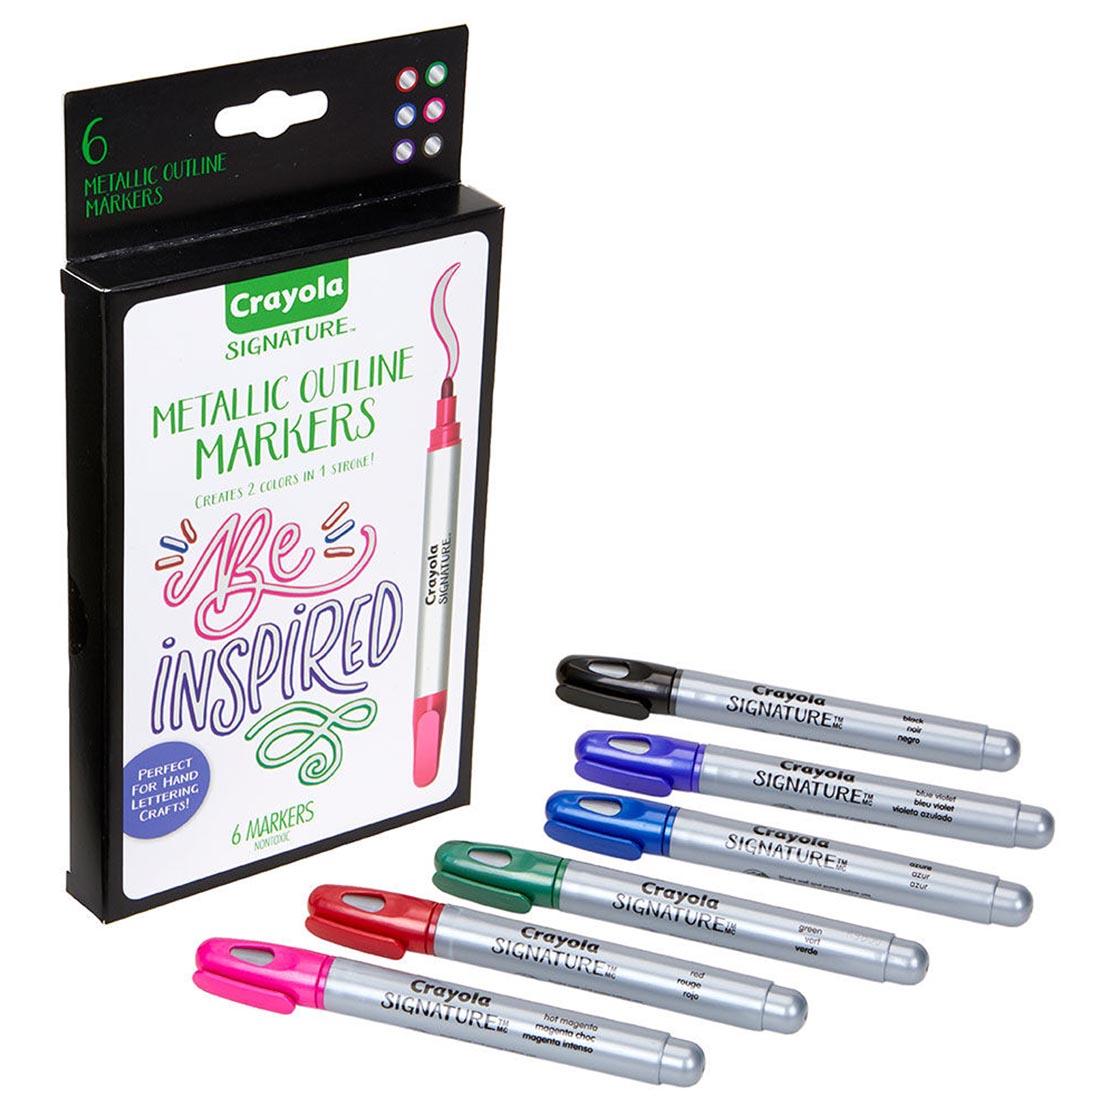 Package of Crayola Signature Metallic Outline Paint Marker Set with 6 Markers Laying Outside